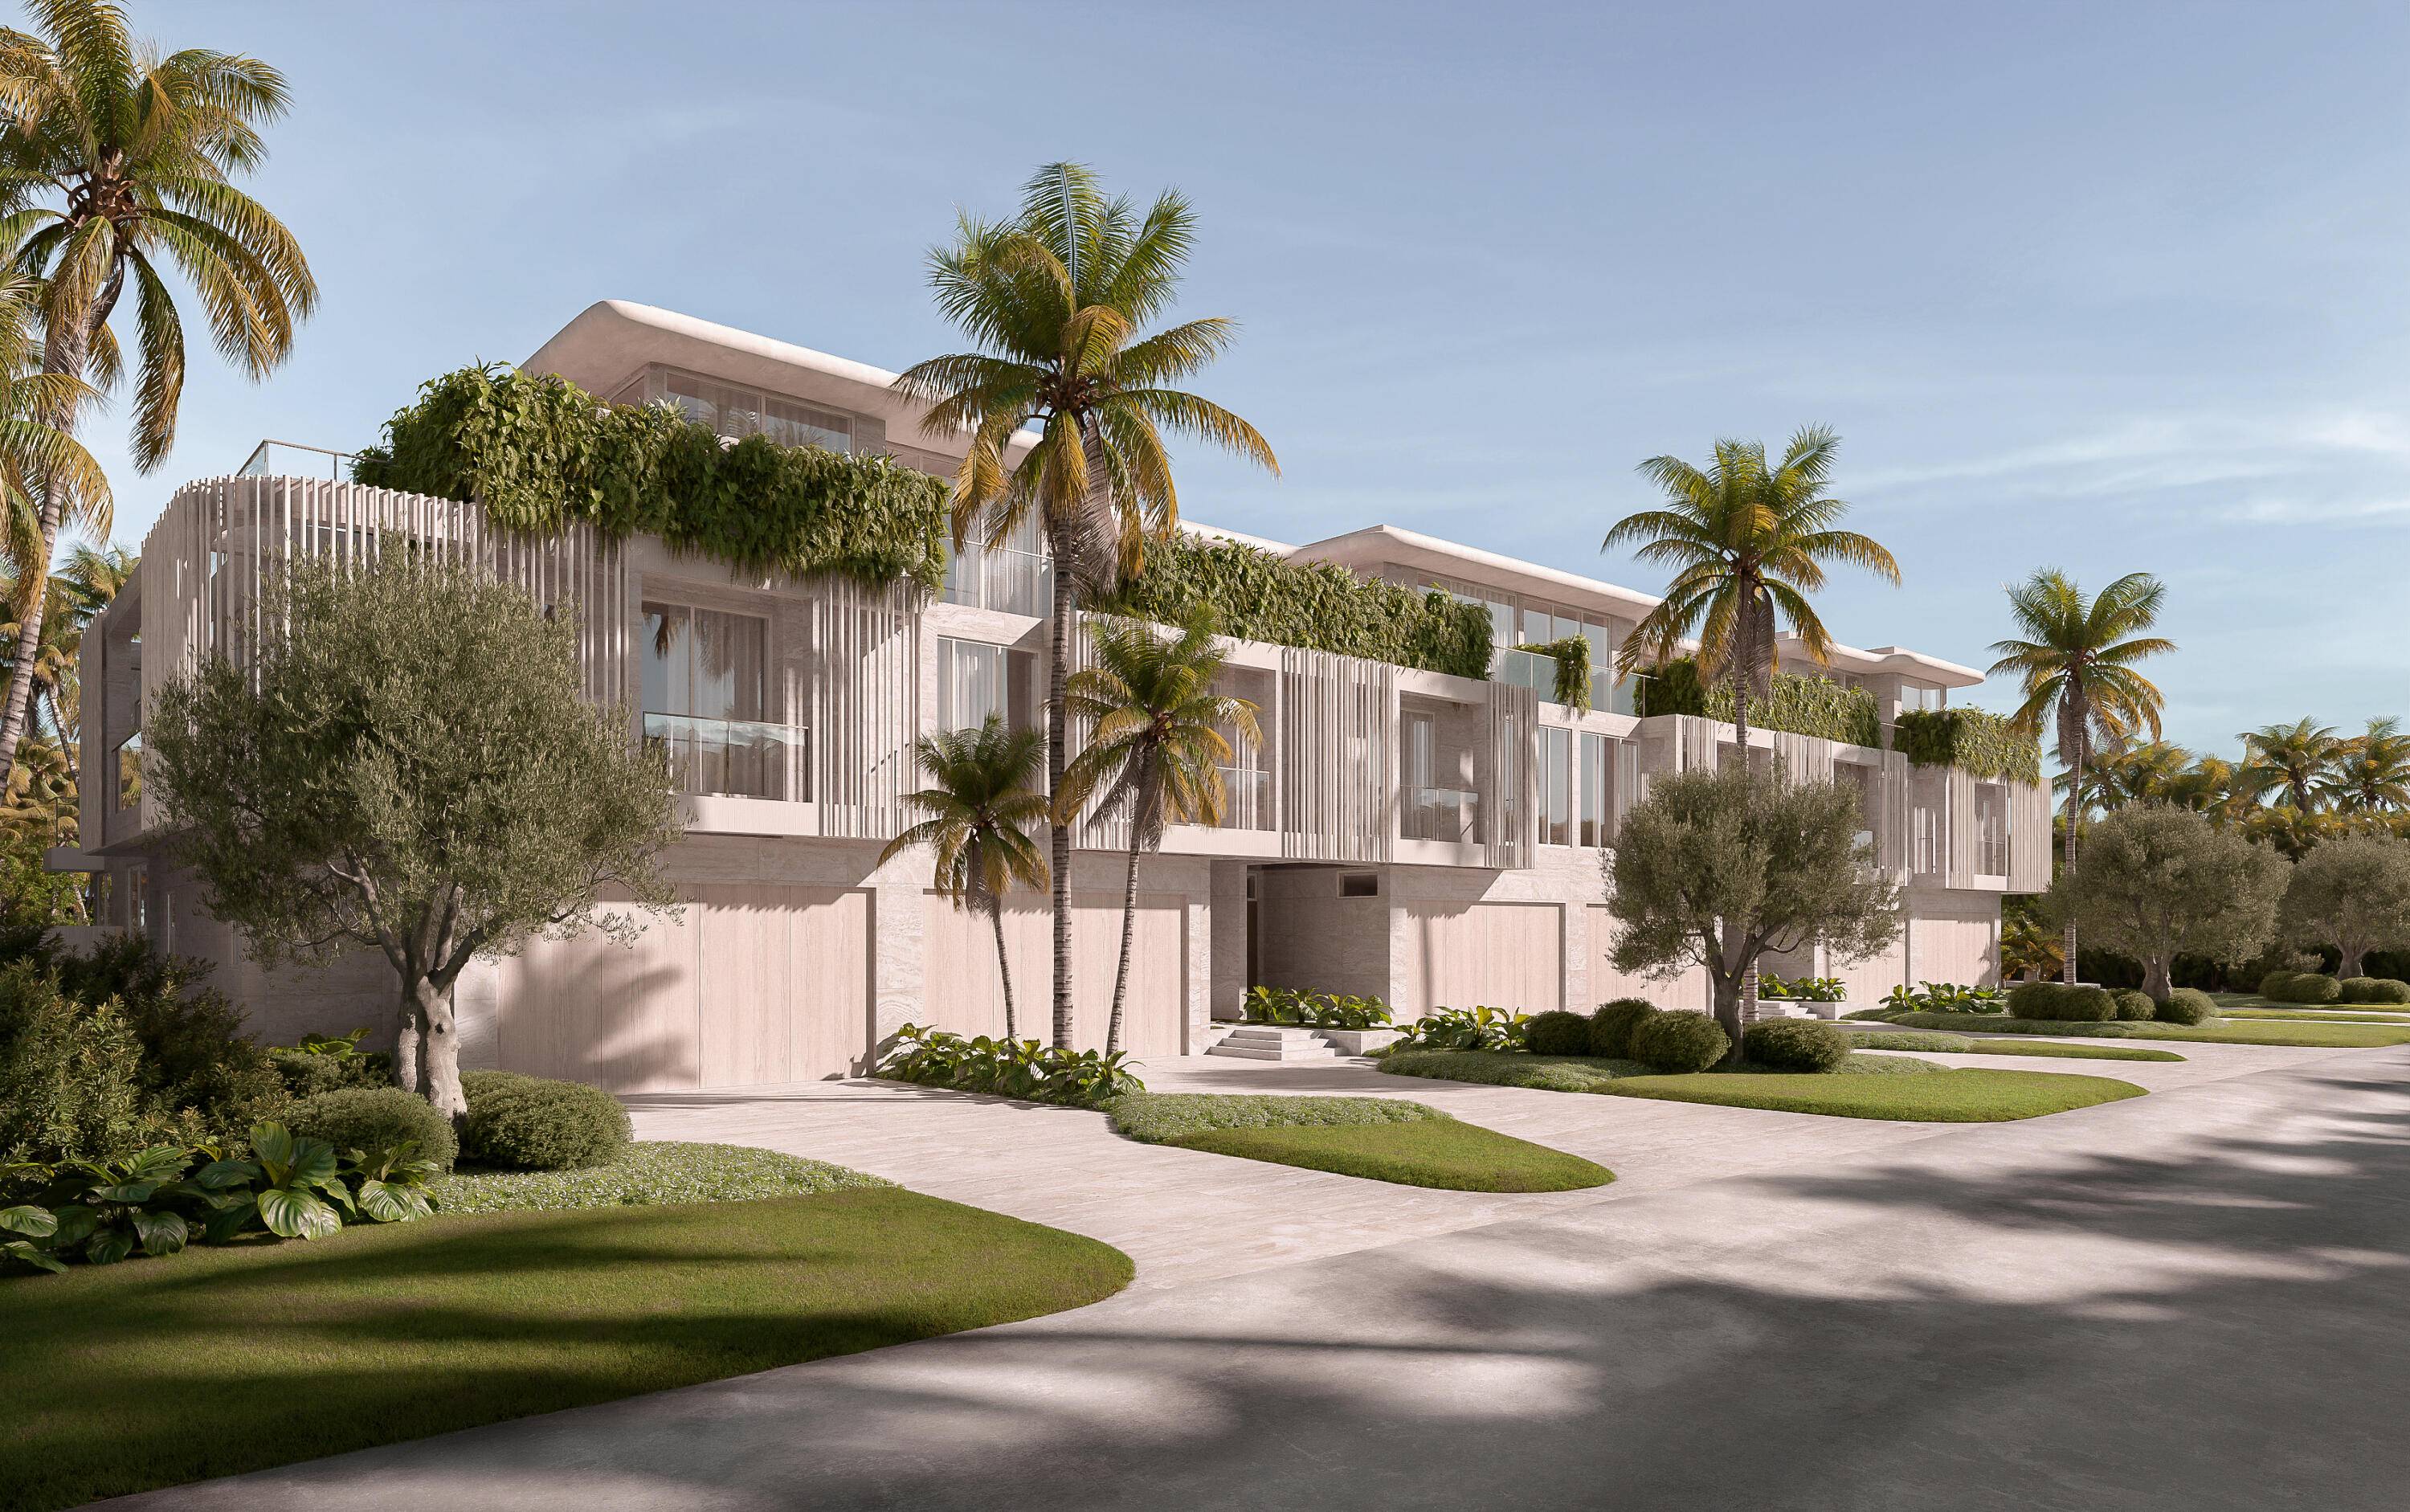 Introducing Sirene Villas, the newest masterpiece by Stamm Development Group, showcasing upscale ultra luxury residences meticulously crafted by world renownedinterior designers Asthetique and Delray Beach's esteemed Randall Stofft Architects.